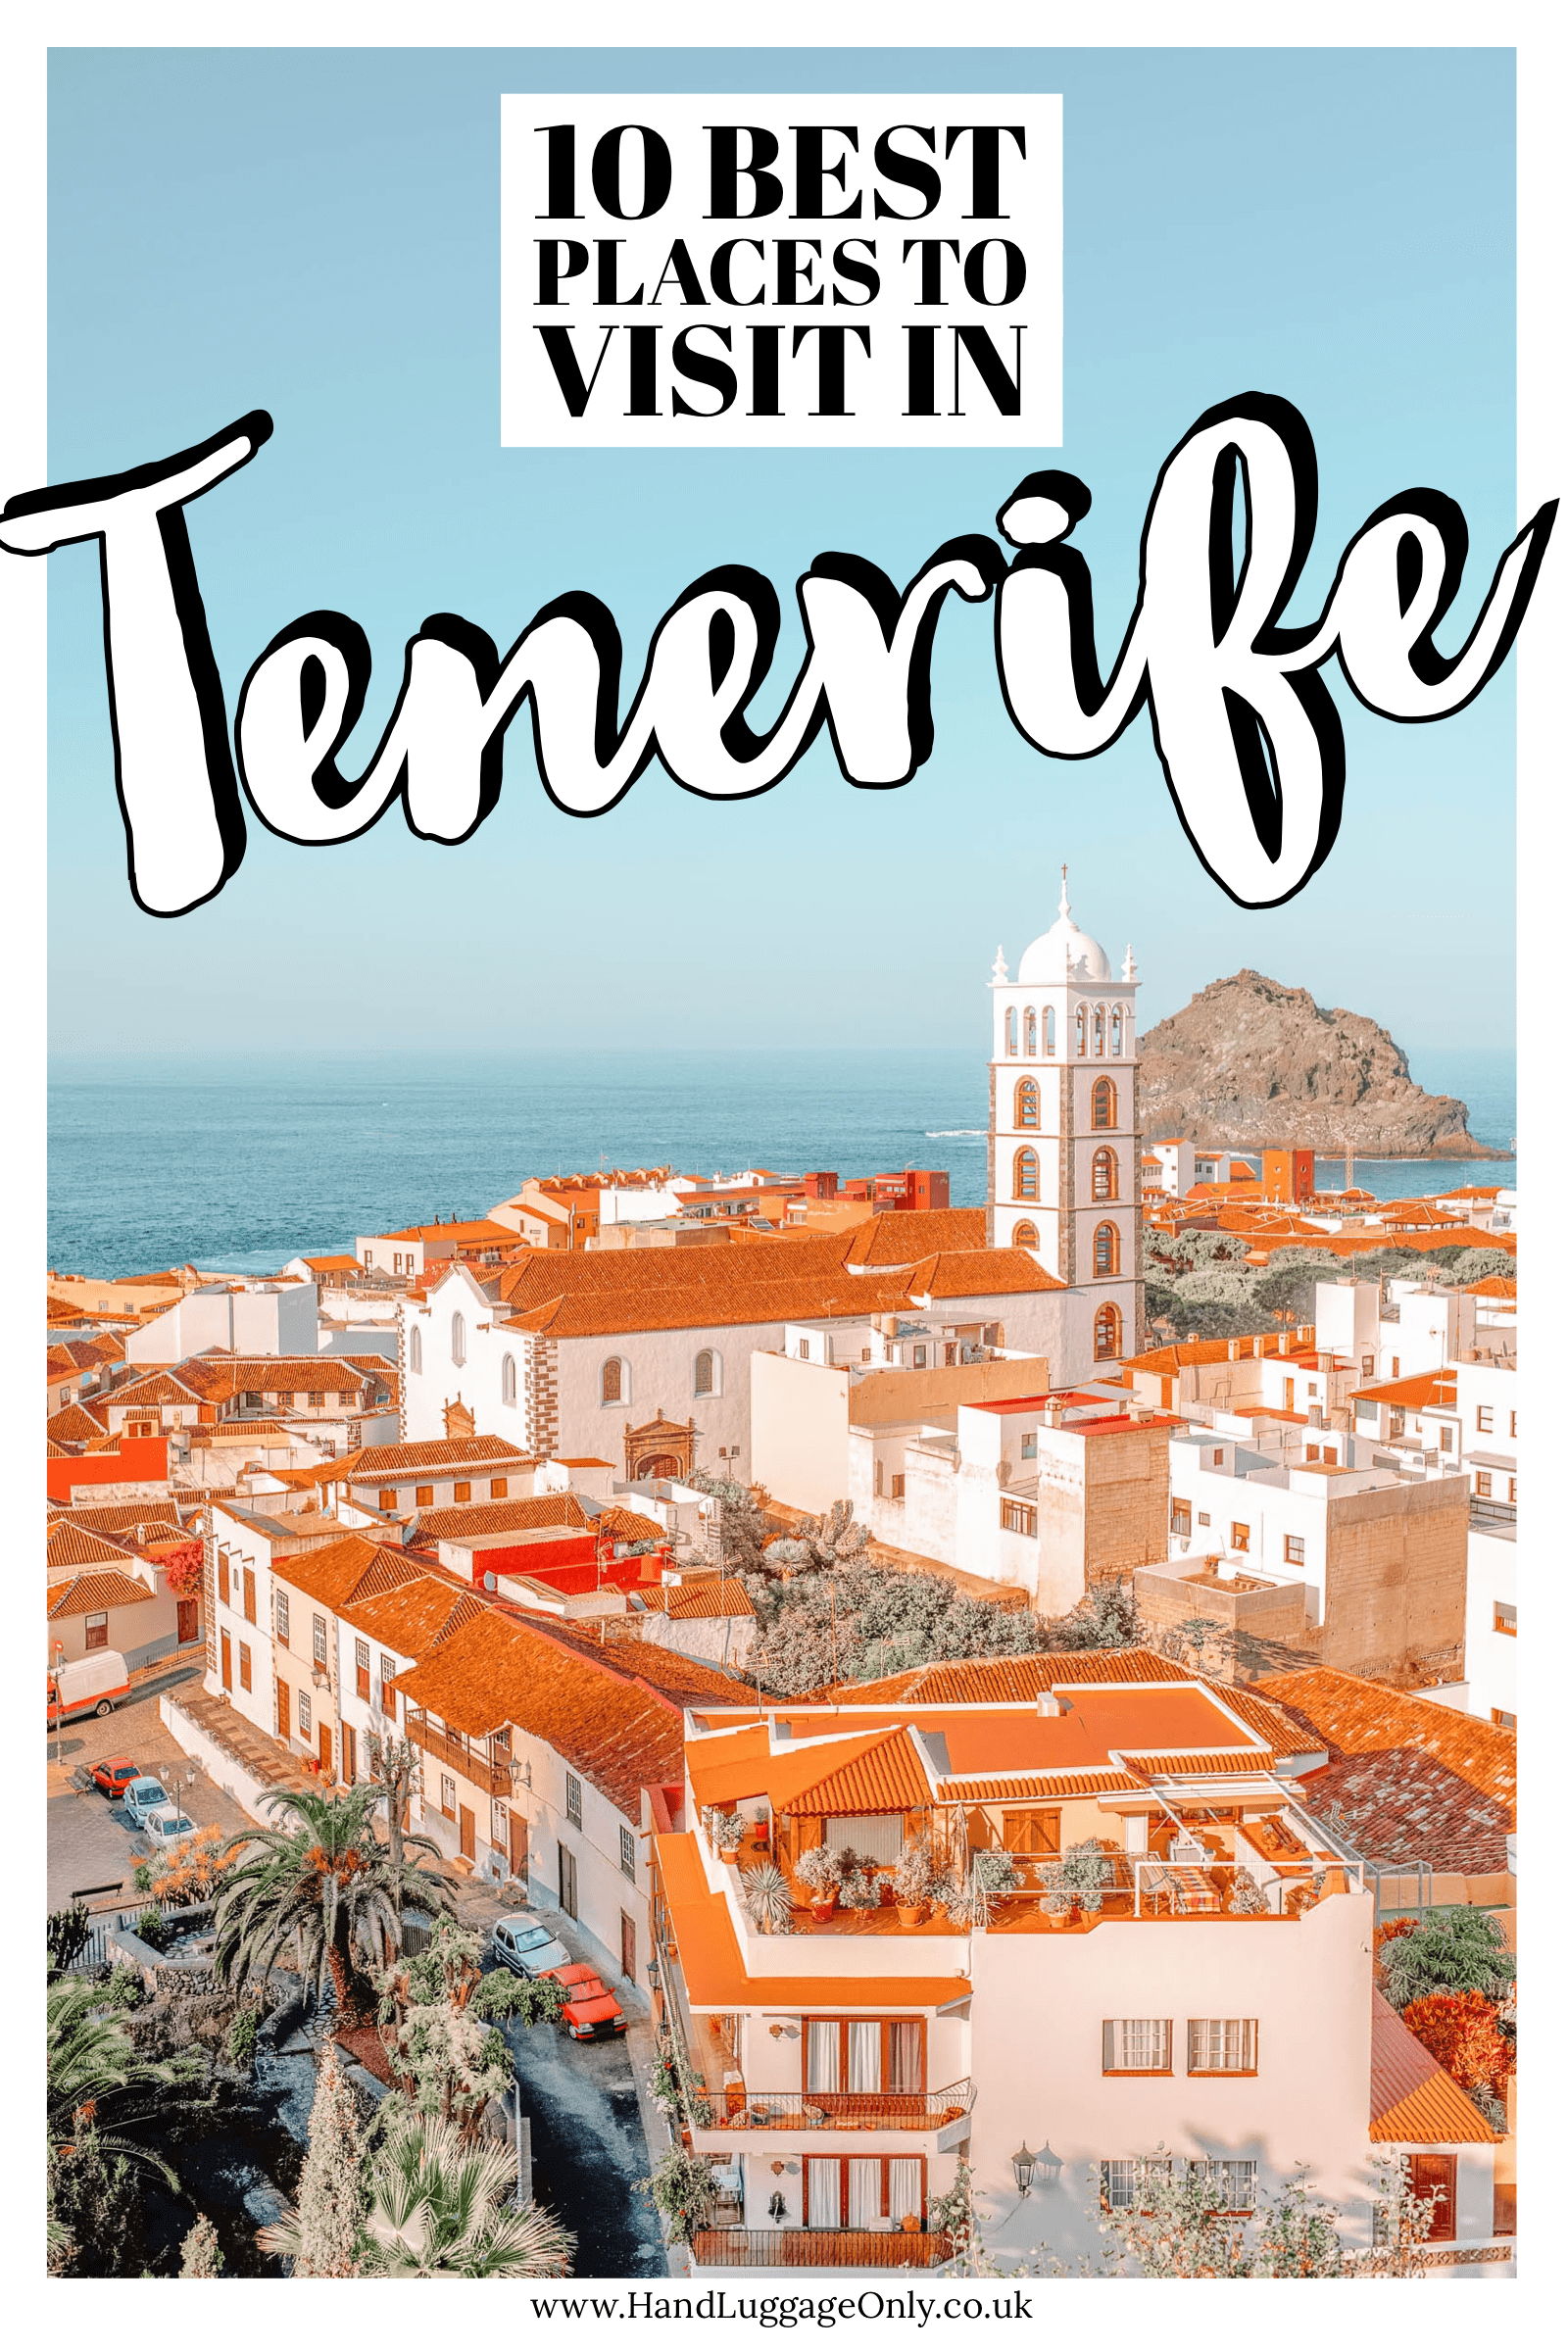 10 Best Places In Tenerife To Visit (18)